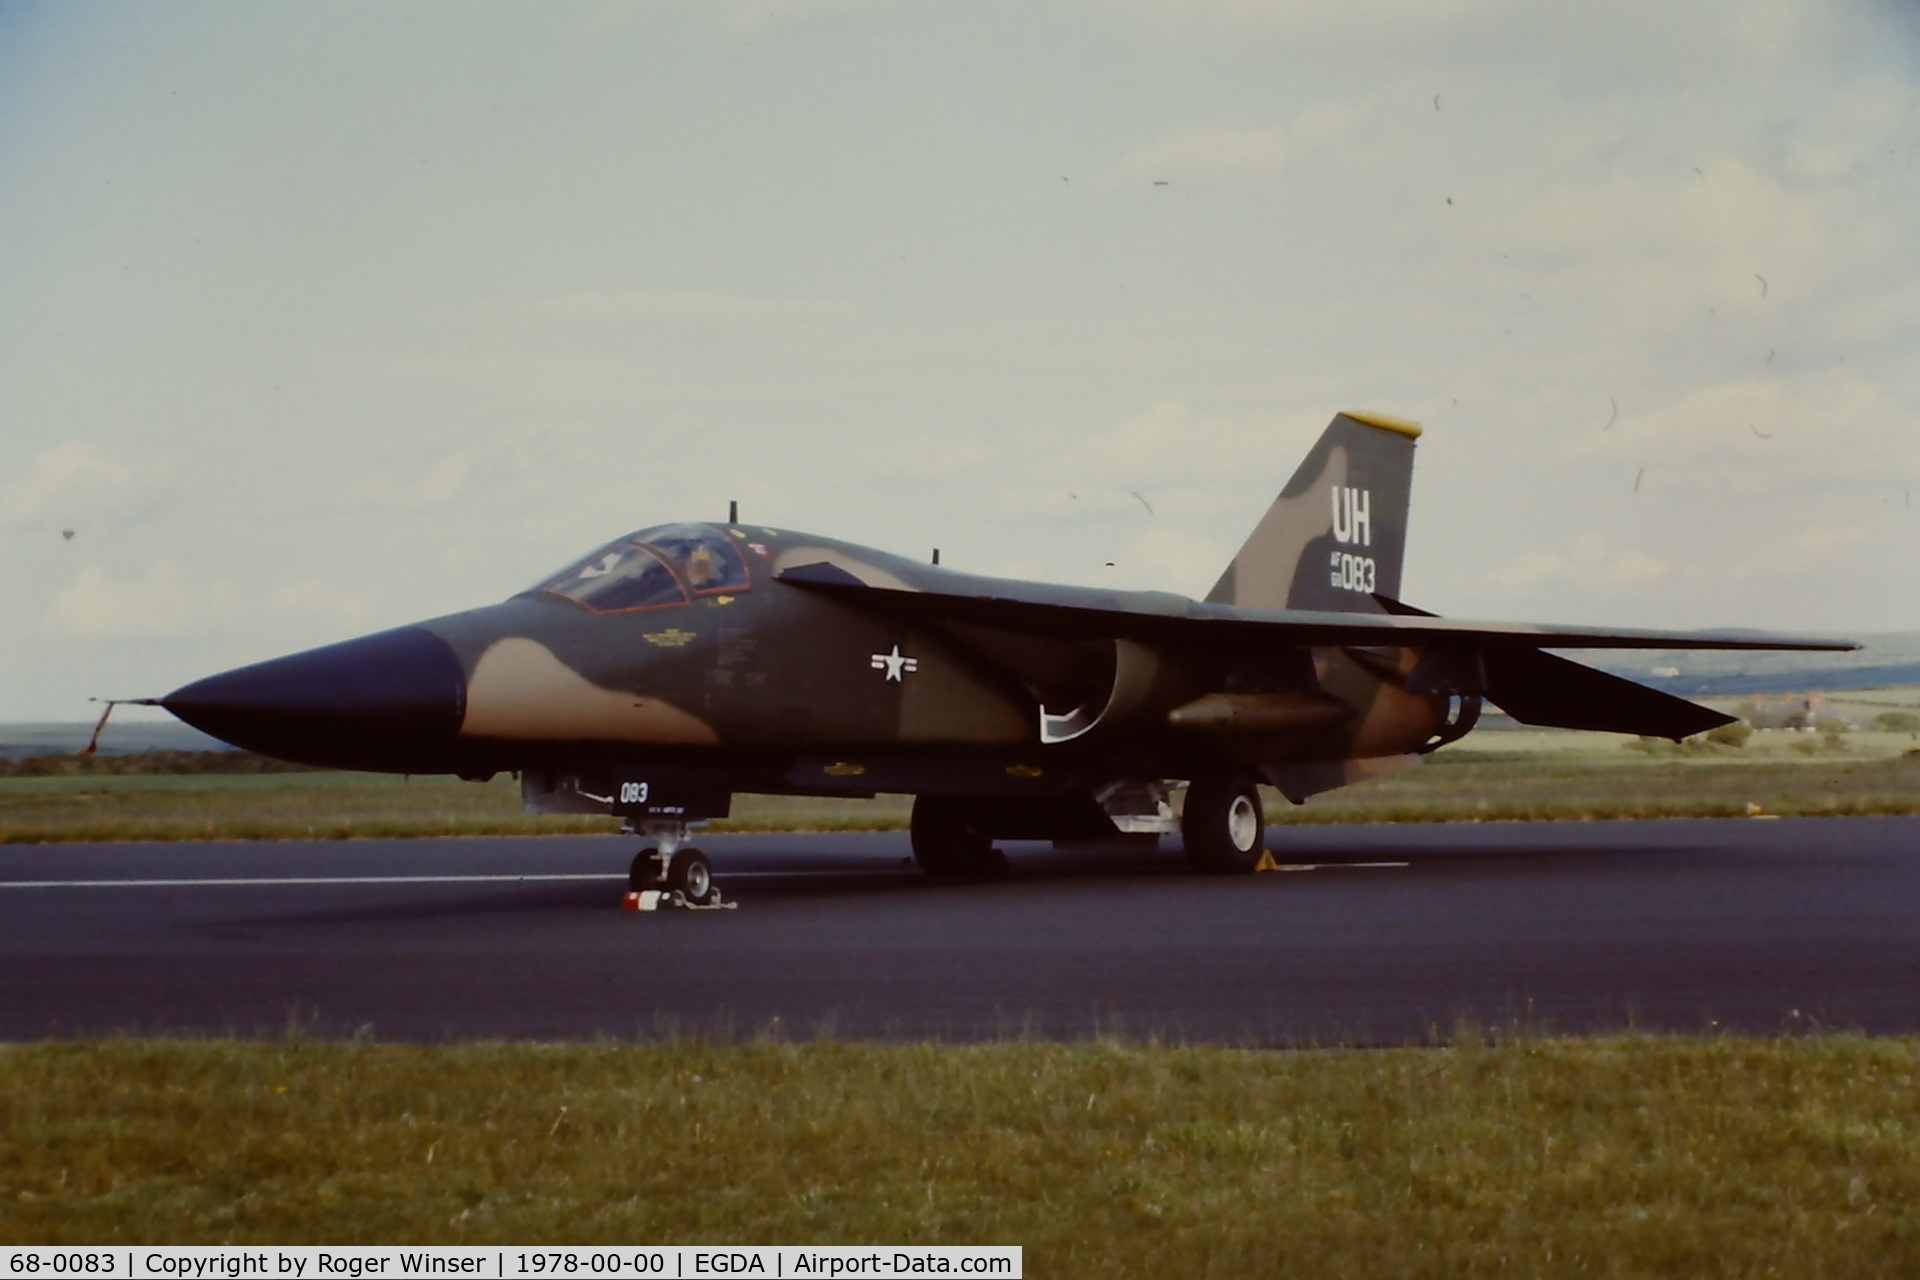 68-0083, 1968 General Dynamics F-111E Aardvark C/N A1-262, Marked UH/68-083 of the 20th TFW based at RAF Upper Heyford. On display at a RAF Brawdy Air Day in the 1970's. Date is estimated.